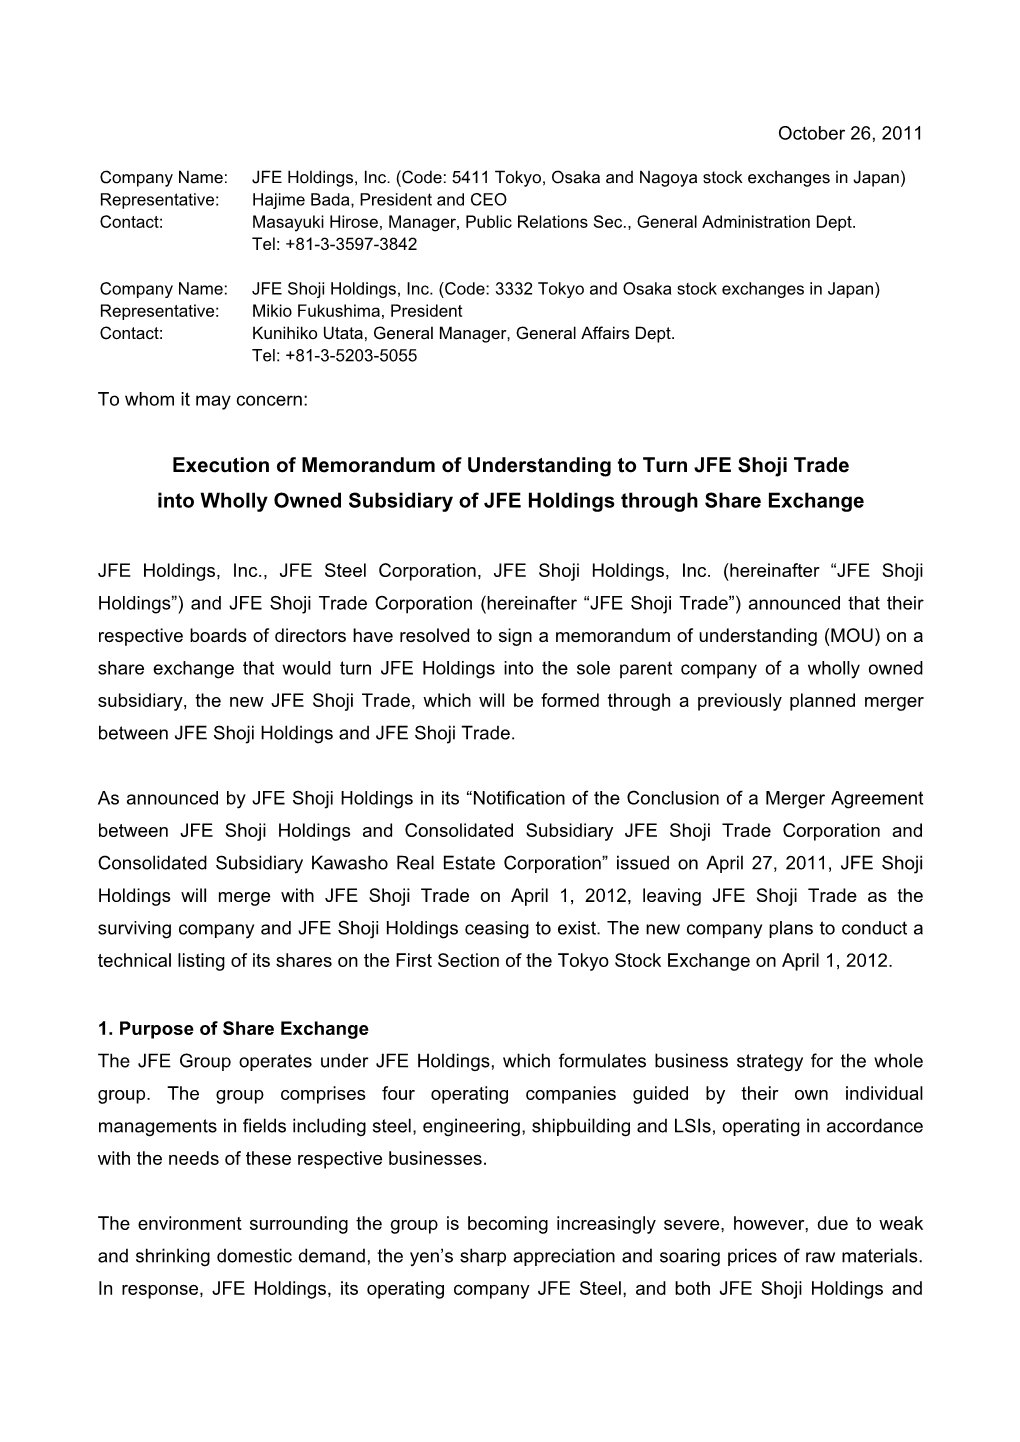 Execution of Memorandum of Understanding to Turn JFE Shoji Trade Into Wholly Owned Subsidiary of JFE Holdings Through Share Exchange